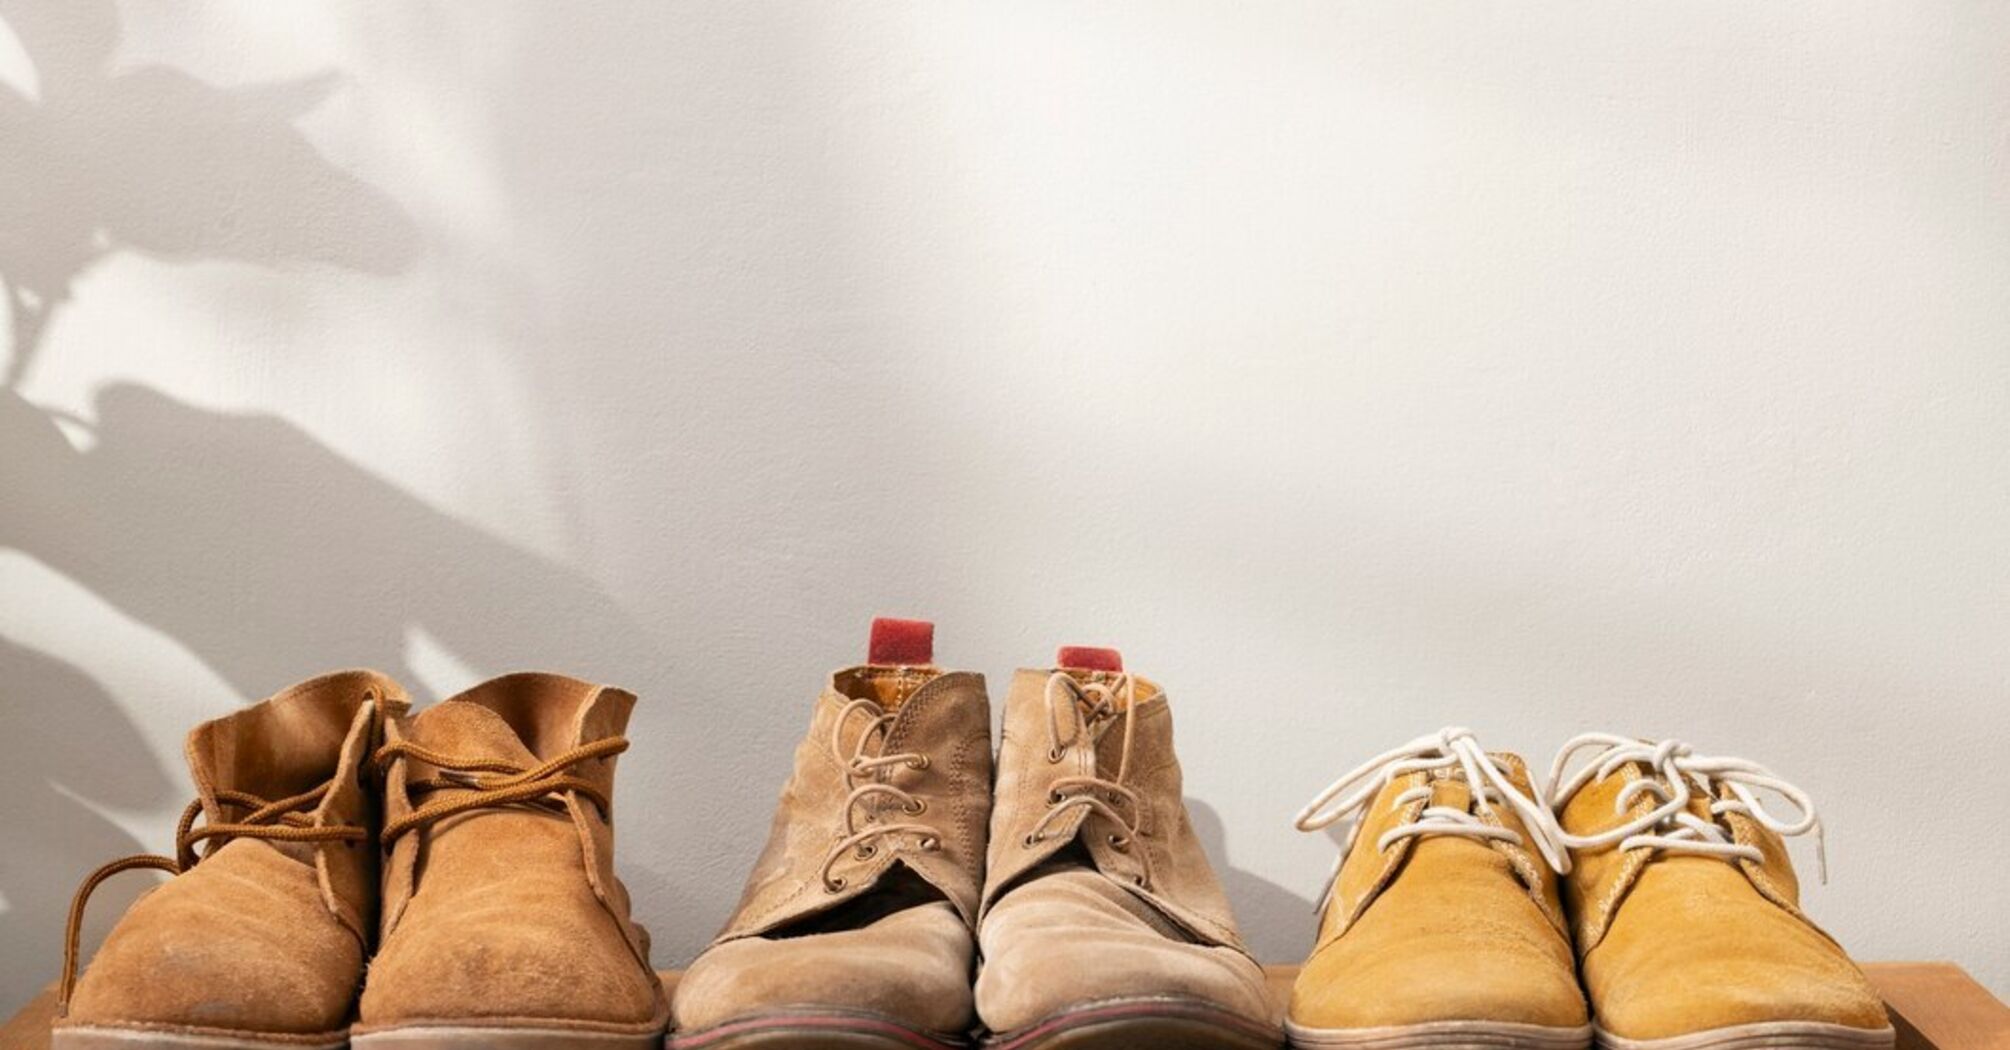 How to effectively clean suede shoes: 3 useful tips